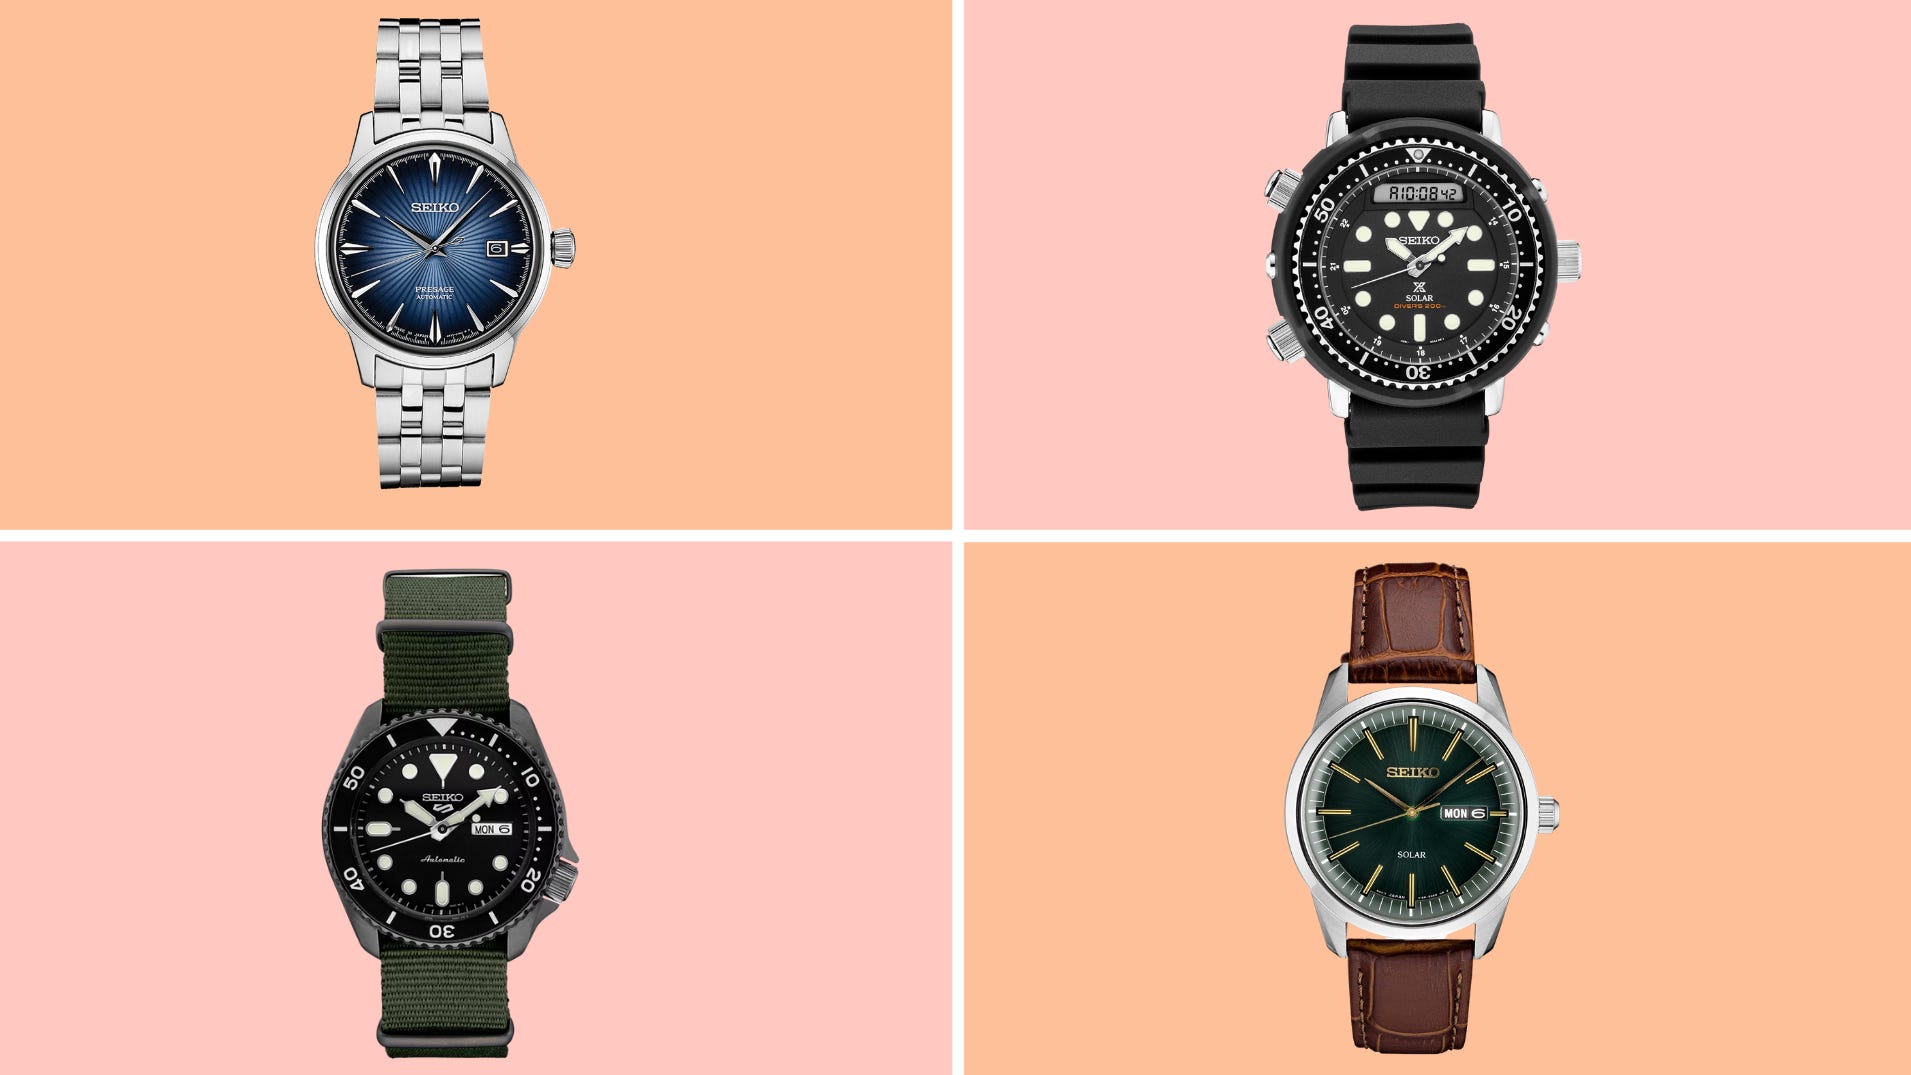 Seiko watch deals: Save at Macy's for Father's Day 2022